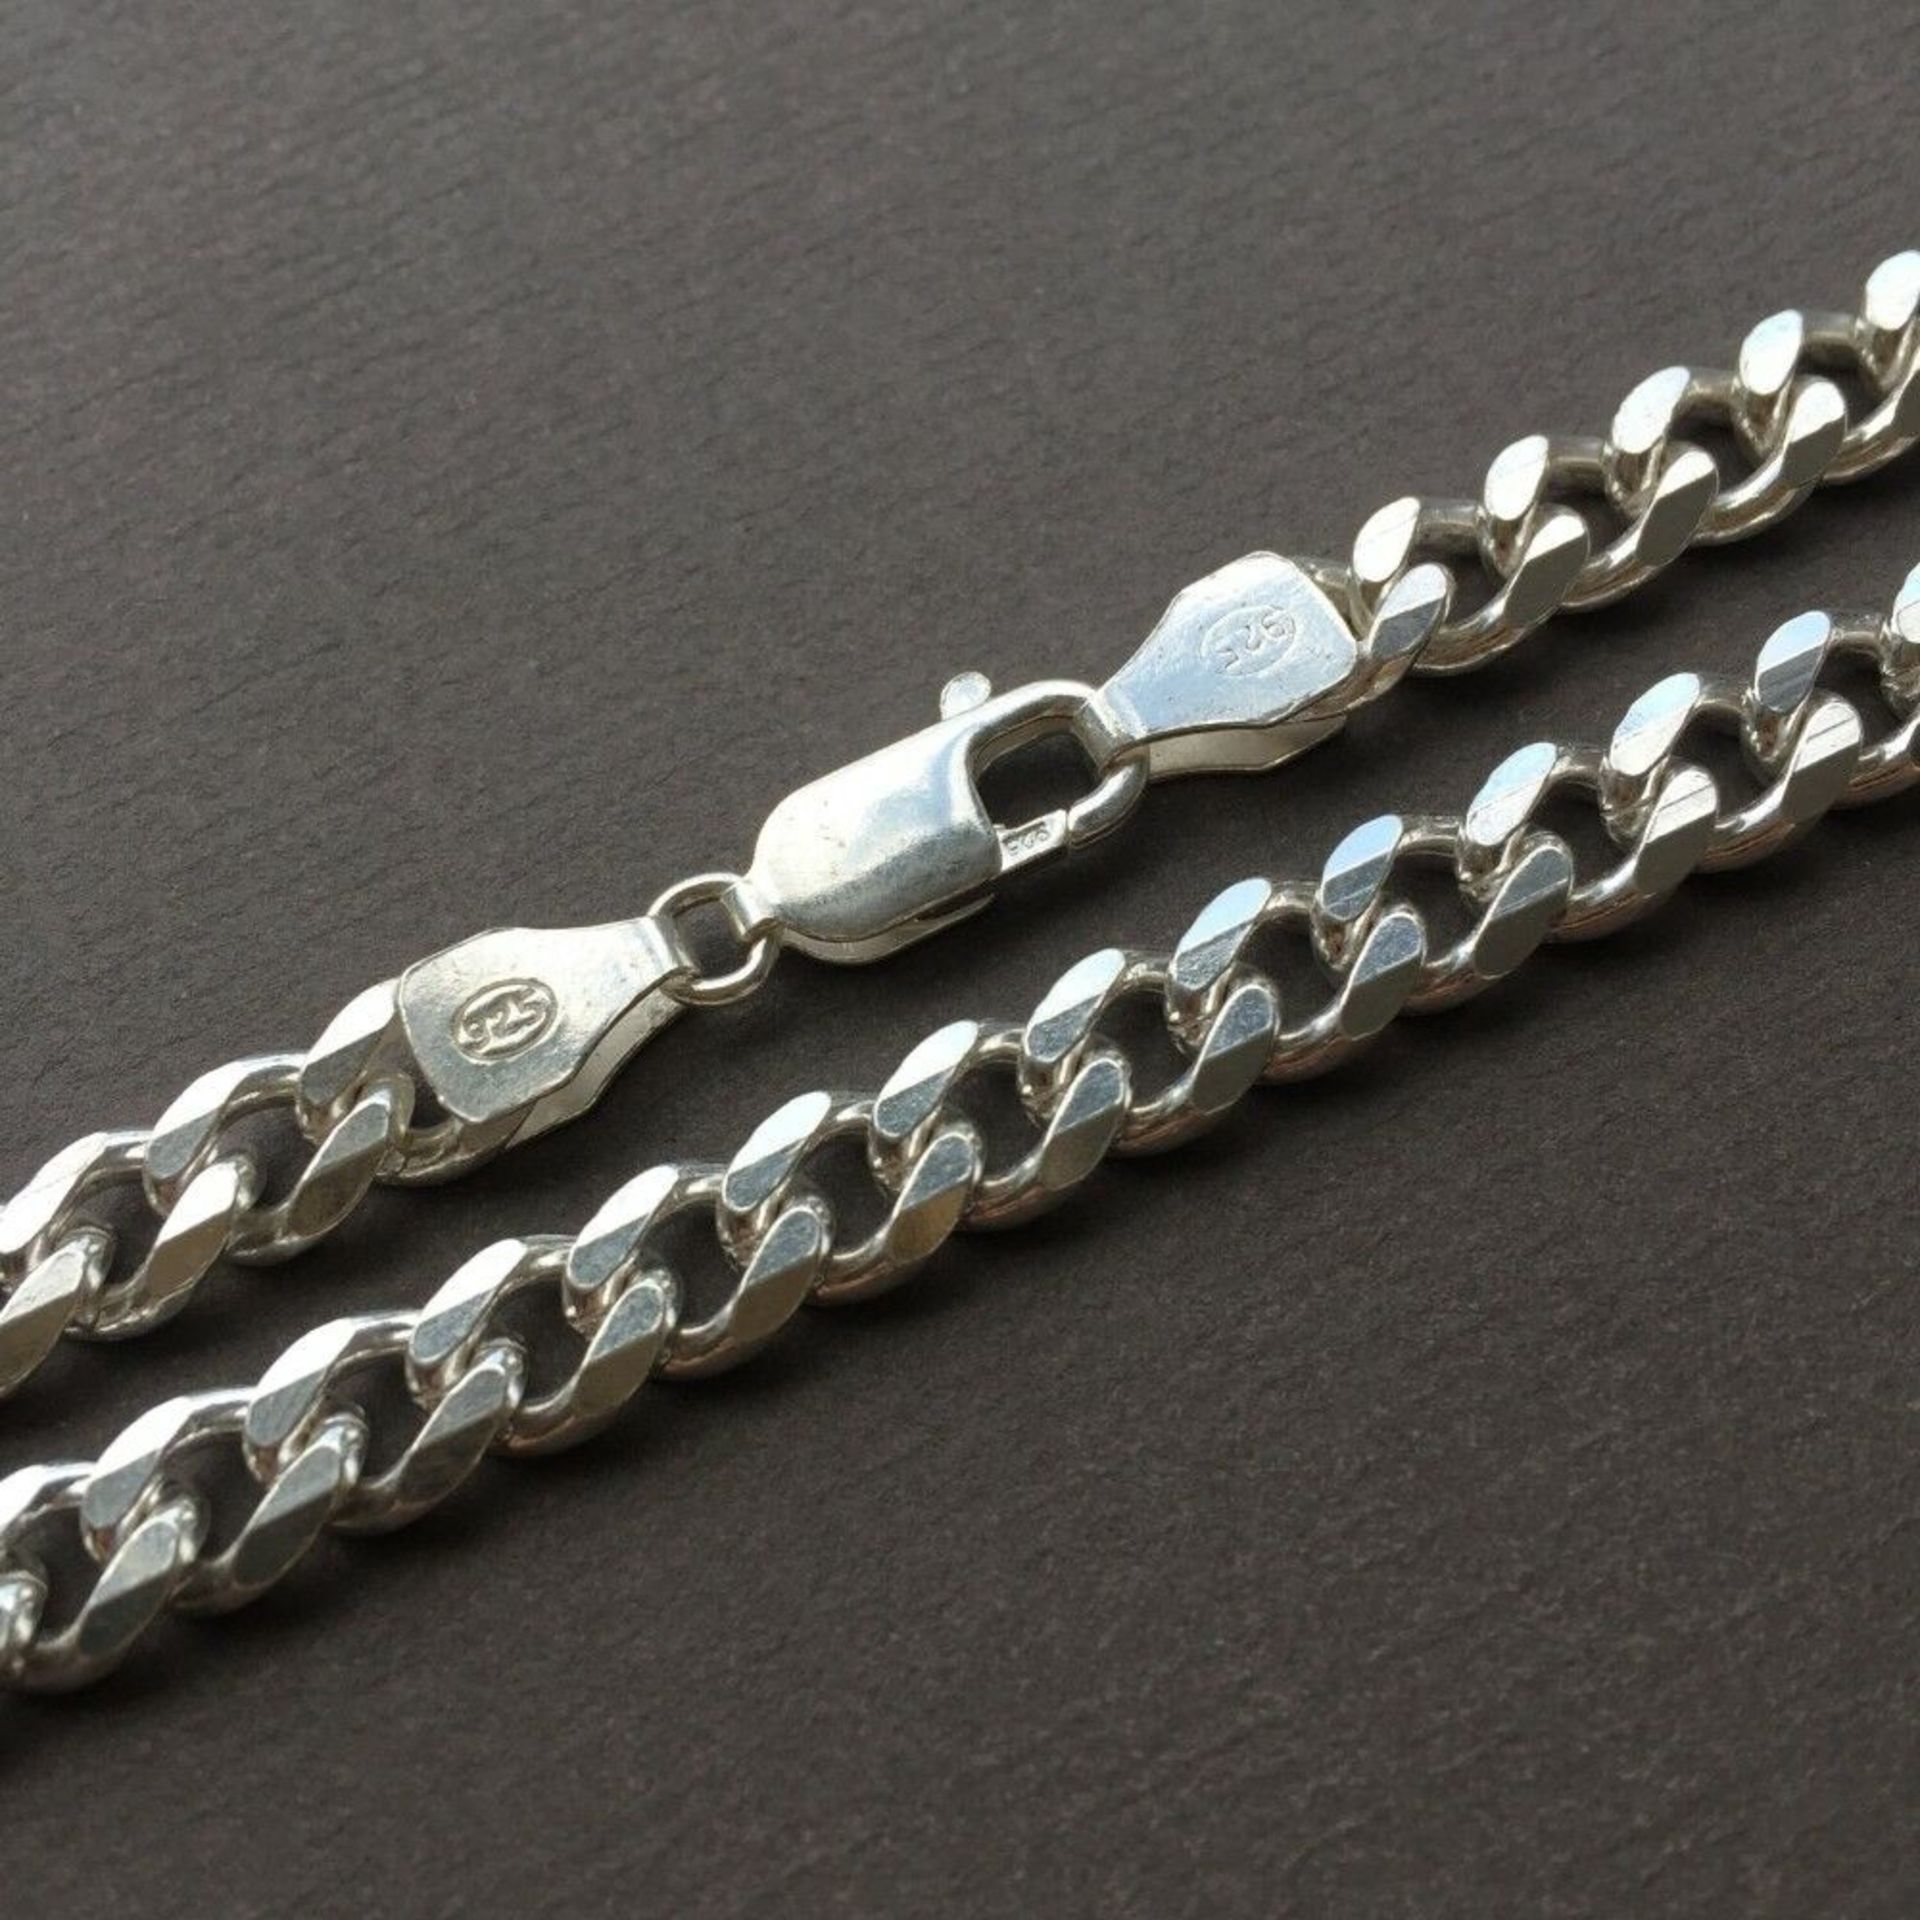 7mm Men's Curb Cuban Link Chain Necklace Pendant 925 Sterling Silver 48 GR 24 inch - 60cm - Image 3 of 7